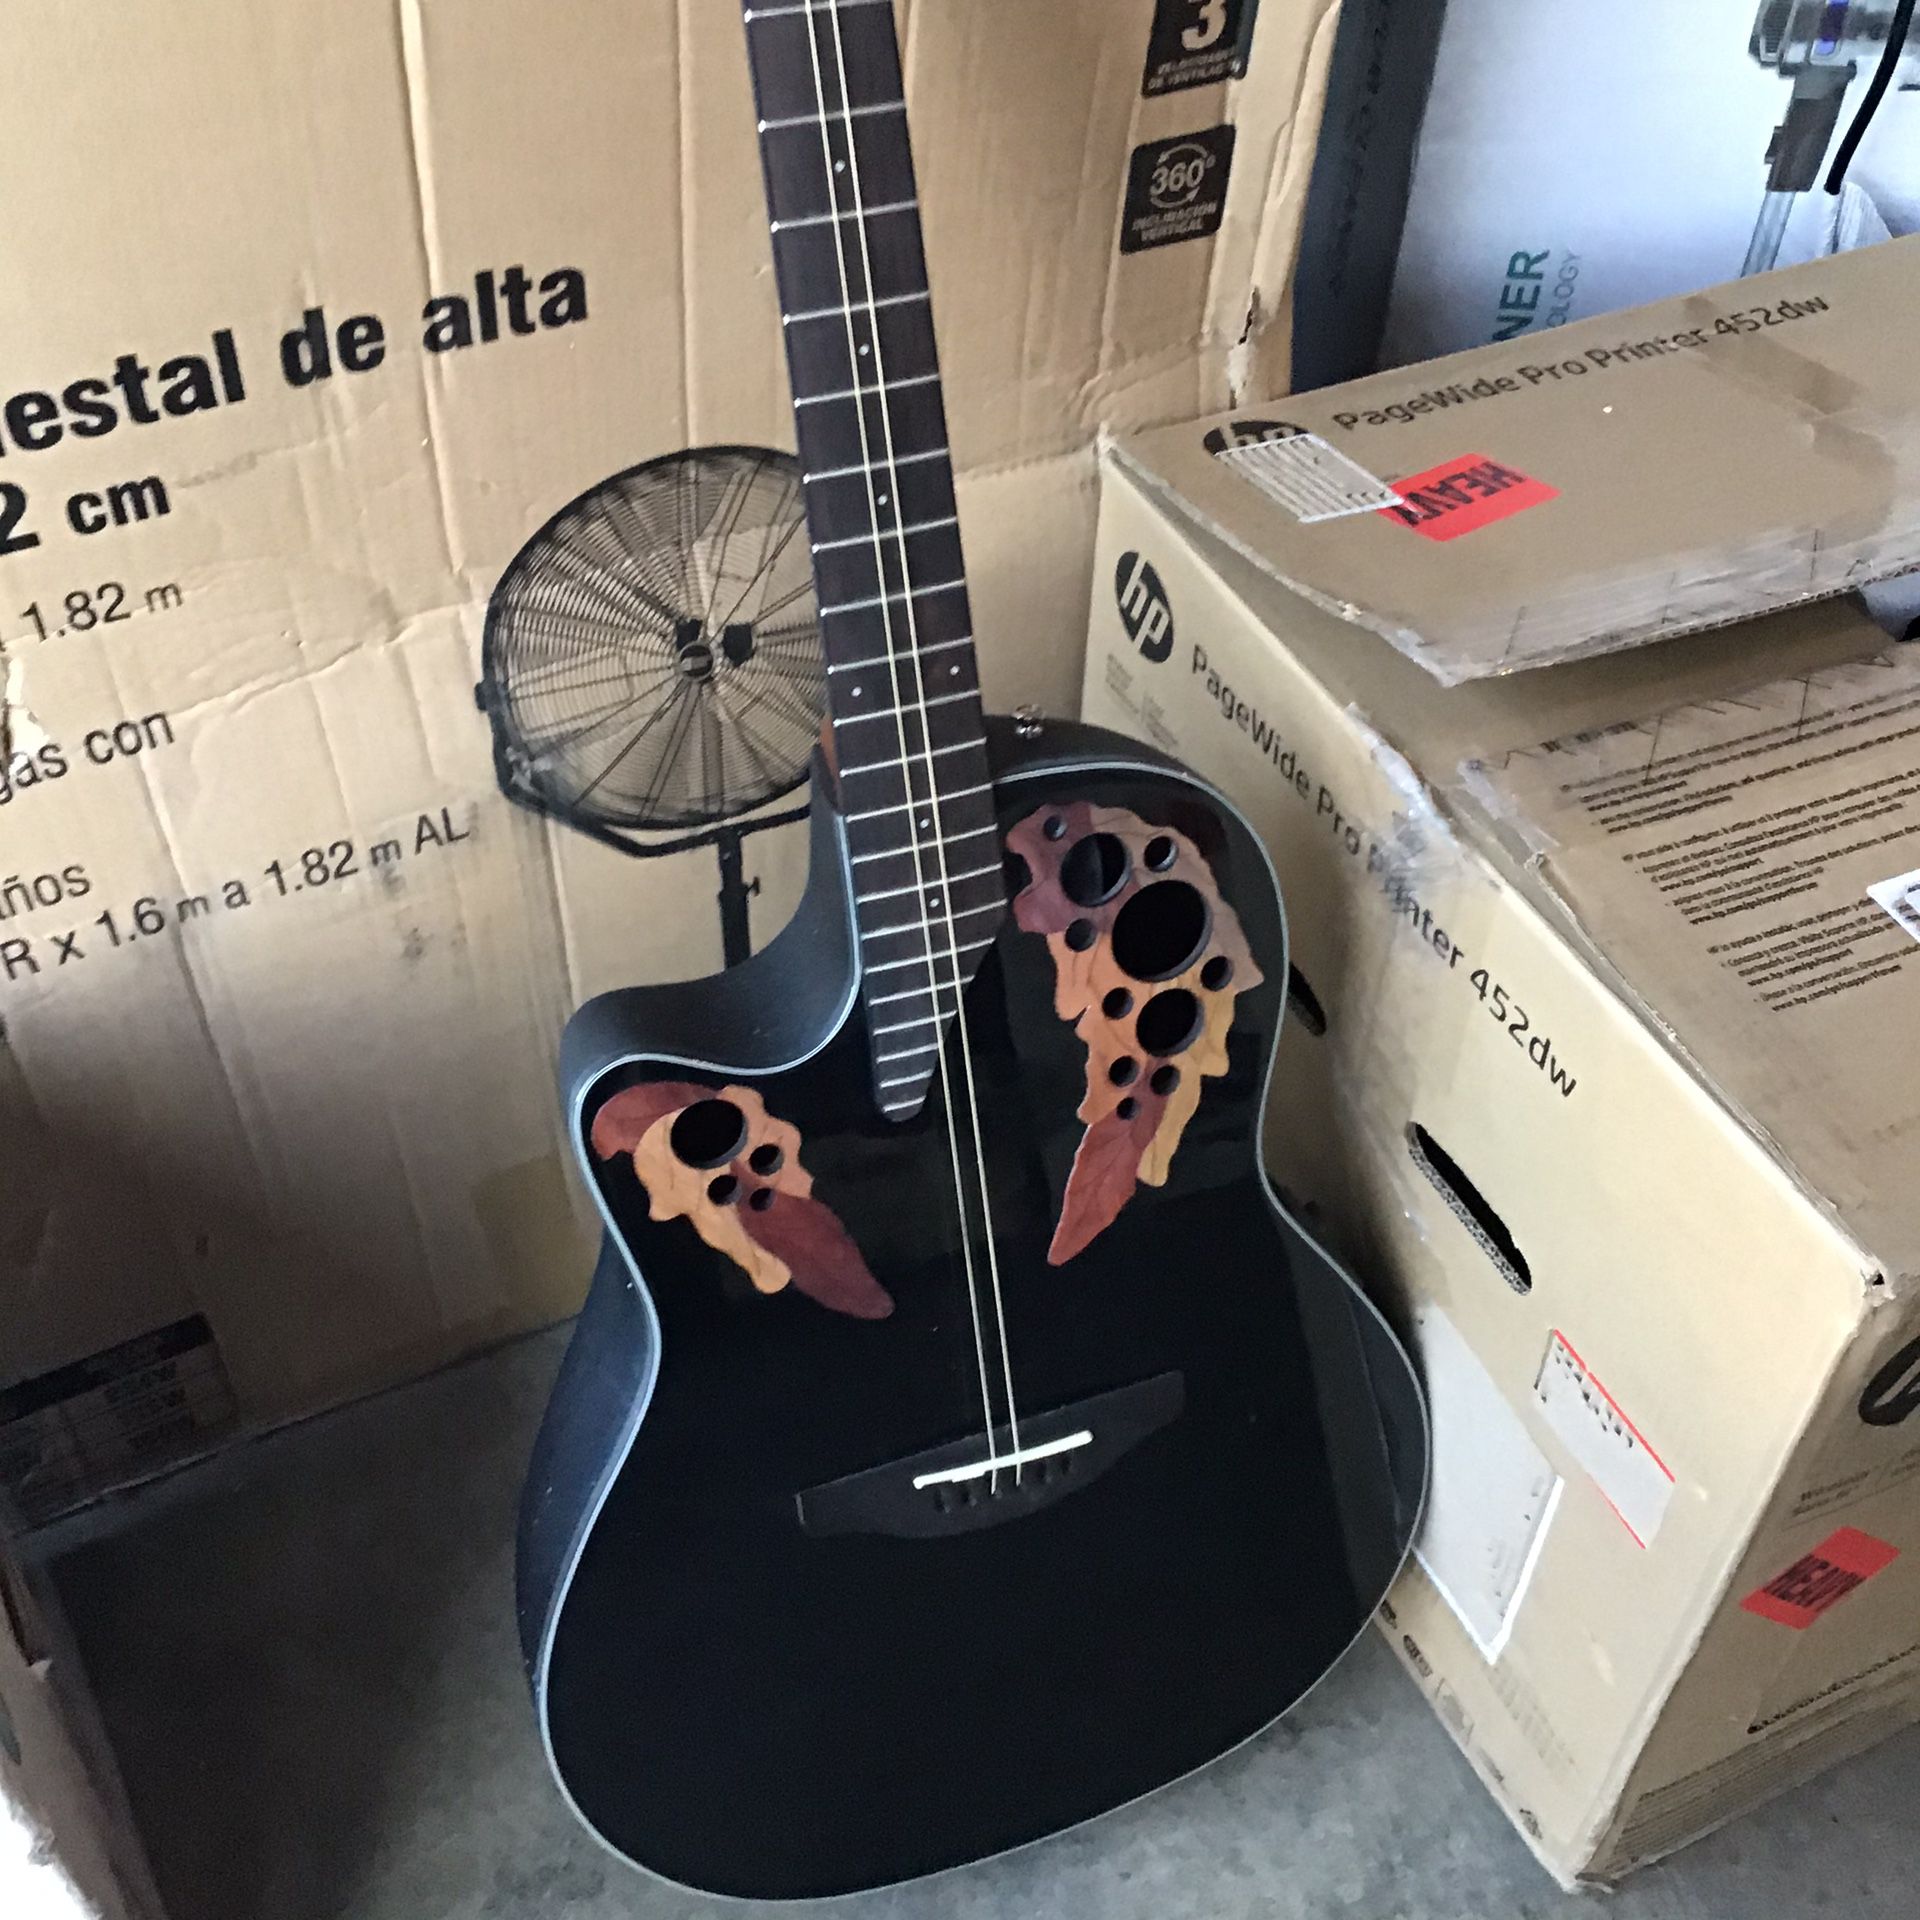 Ovation elite celebrity 6 string electric guitar black. Like new excellent condition open box Comes with string in bag in original box